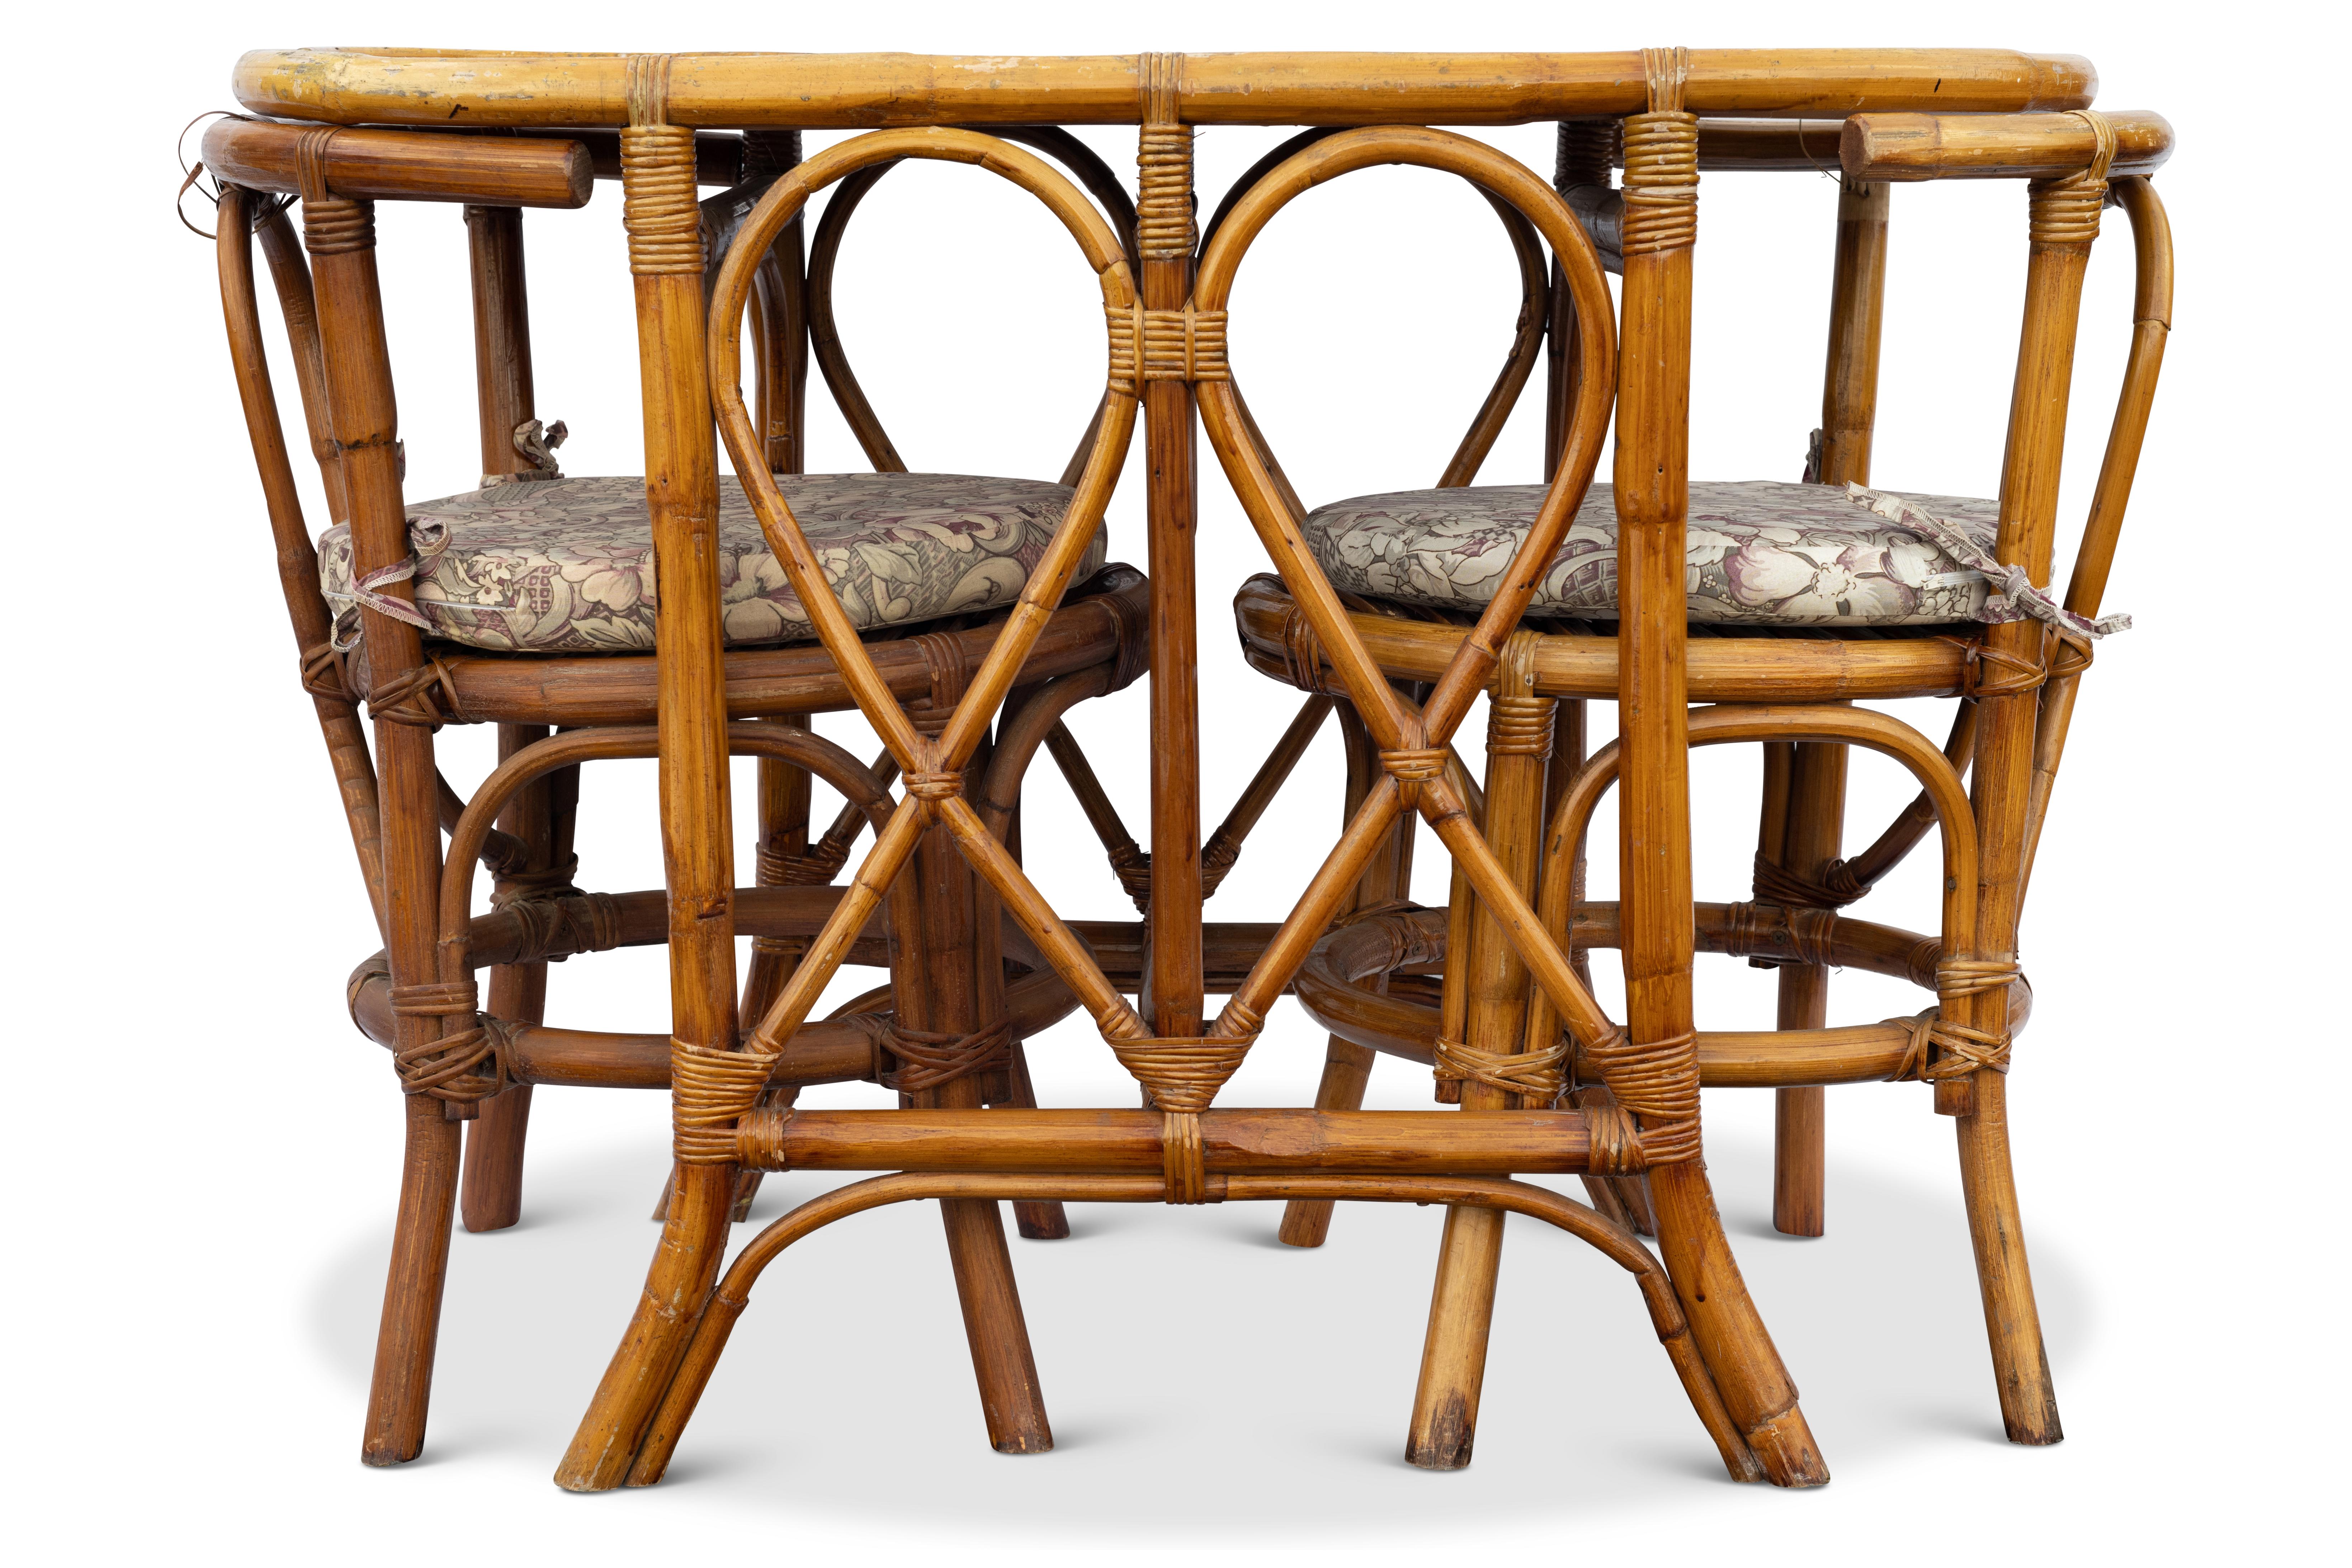 Italian Bohemian Curved Bamboo & Cane Three Piece Dining Set from Italy, 1950s For Sale